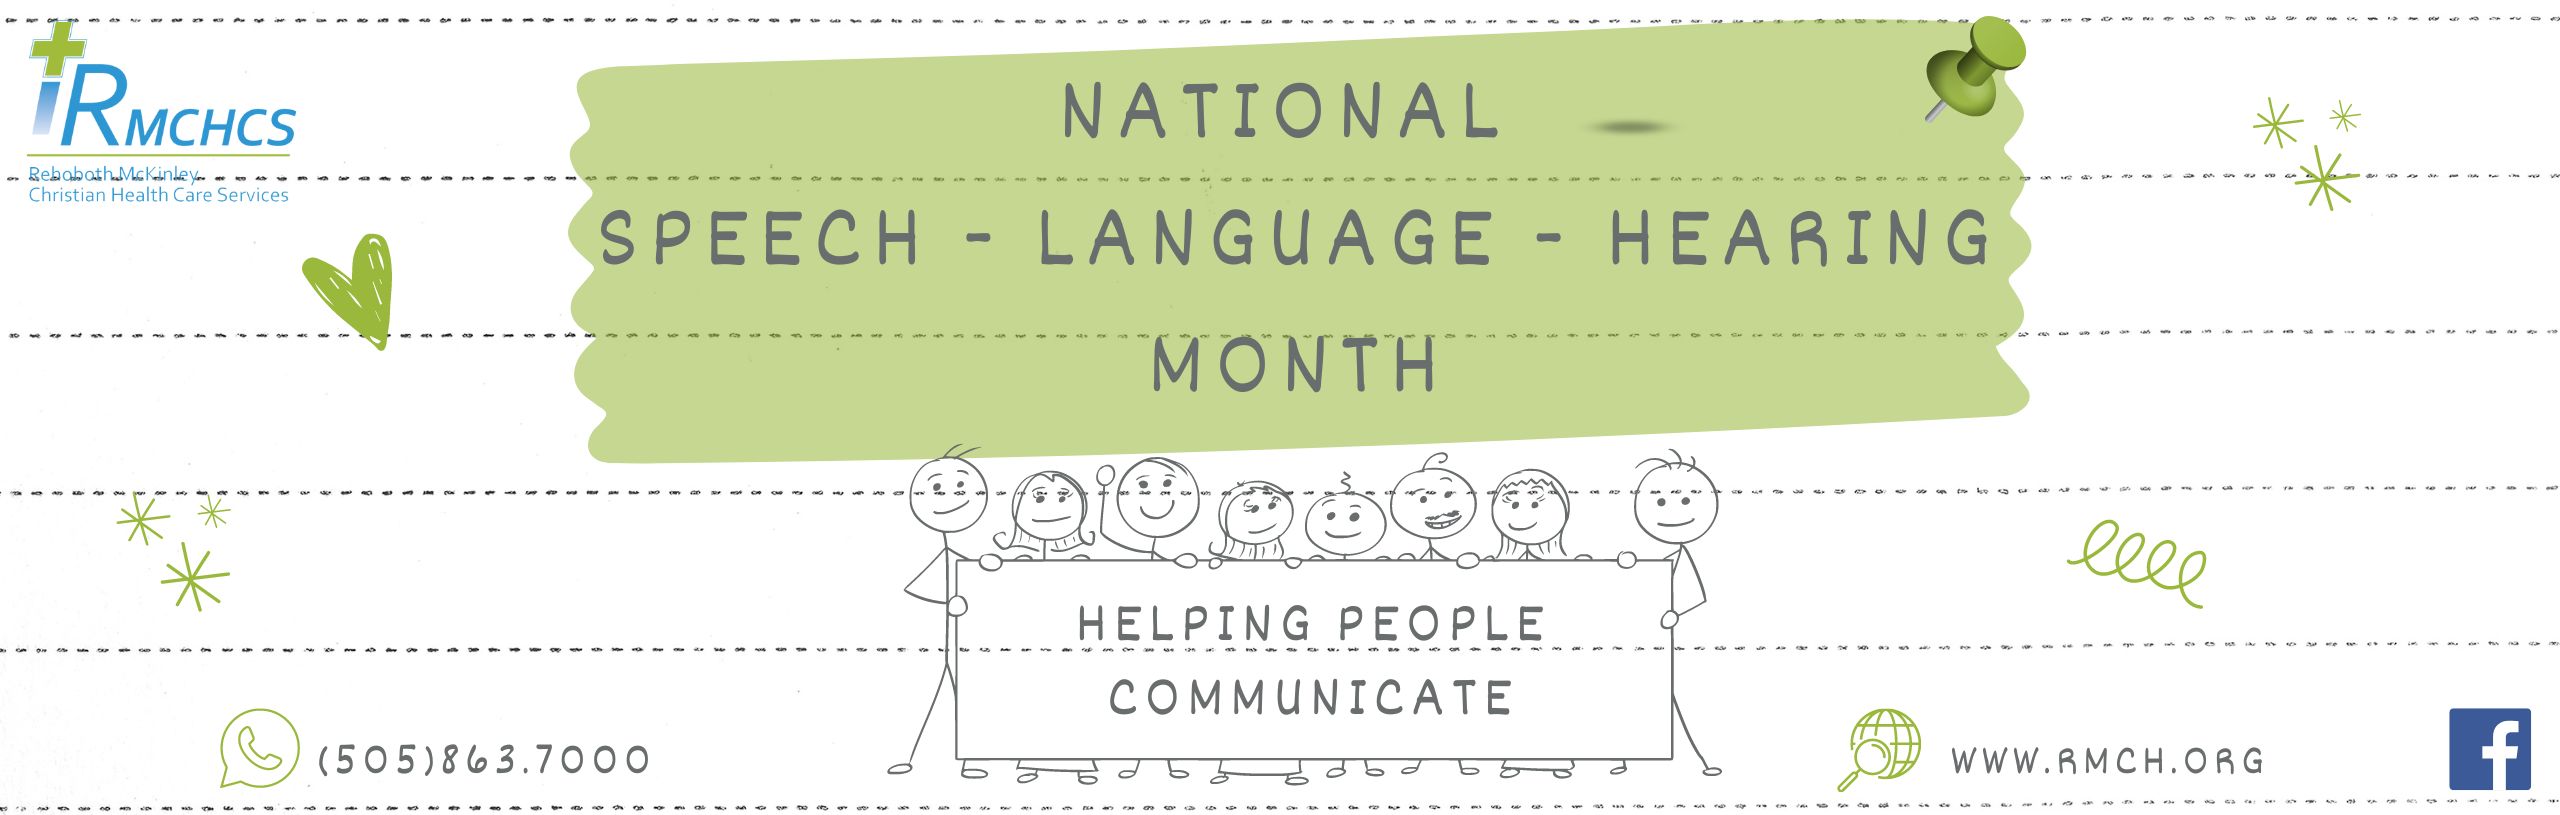 National Speech Hearing and Language Month